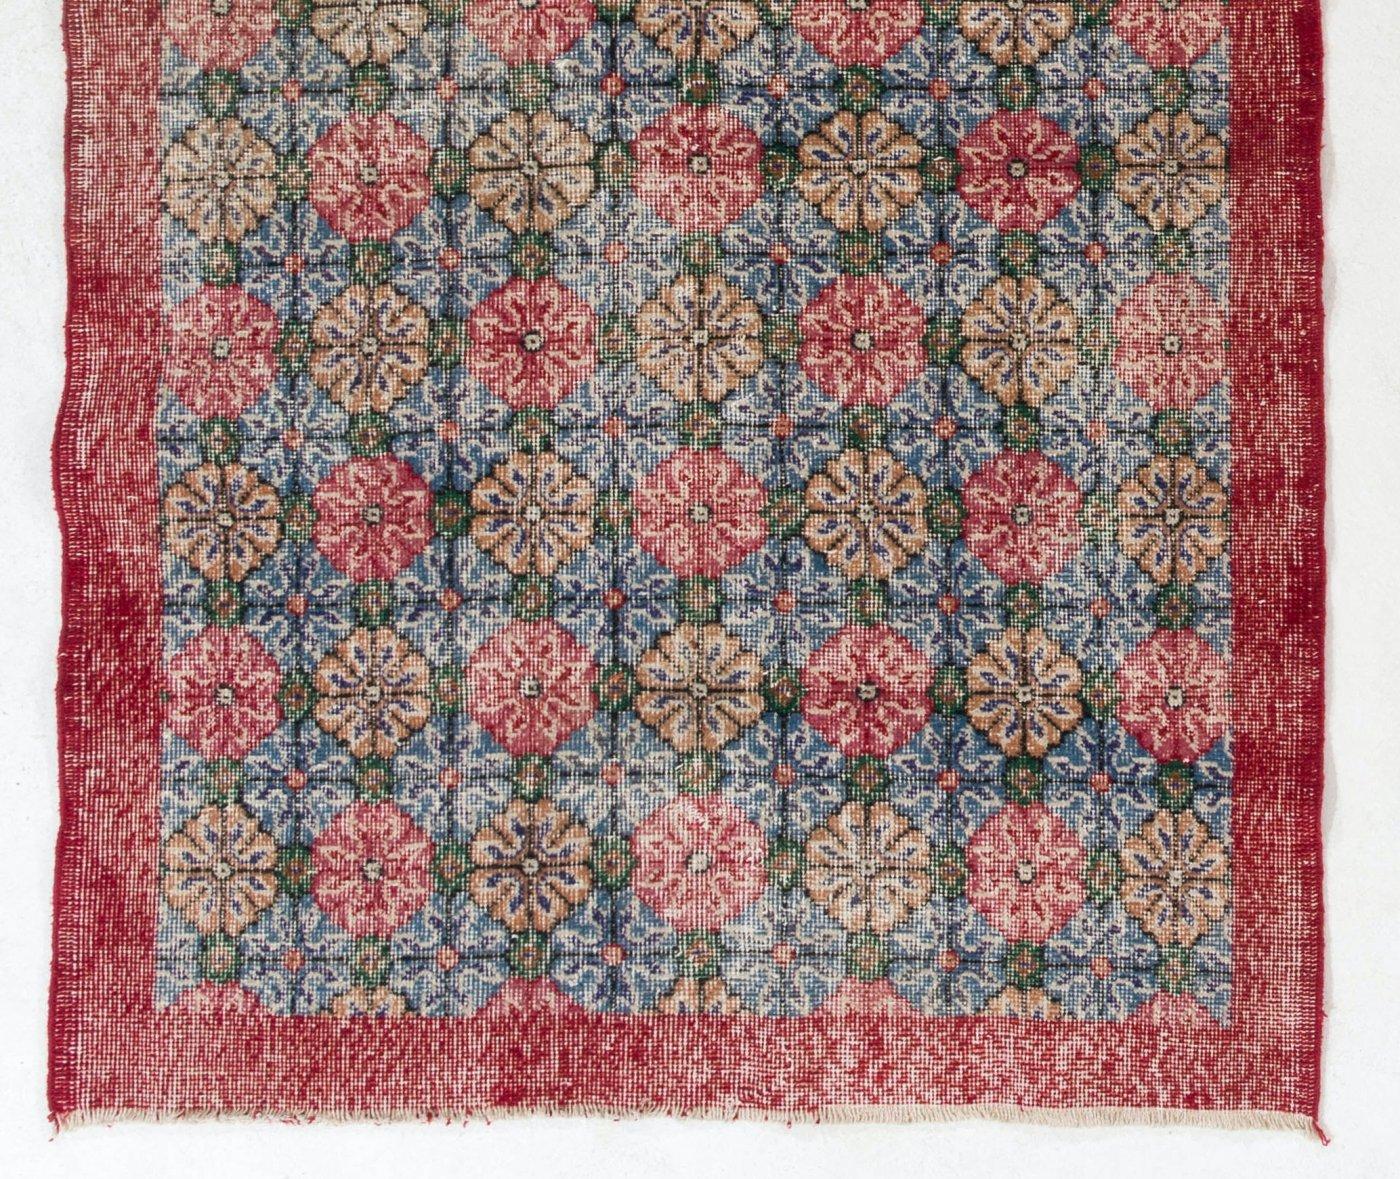 Oushak Vintage Handmade Turkish Accent Rug with All-Over Floral Design. 4 x 7 ft